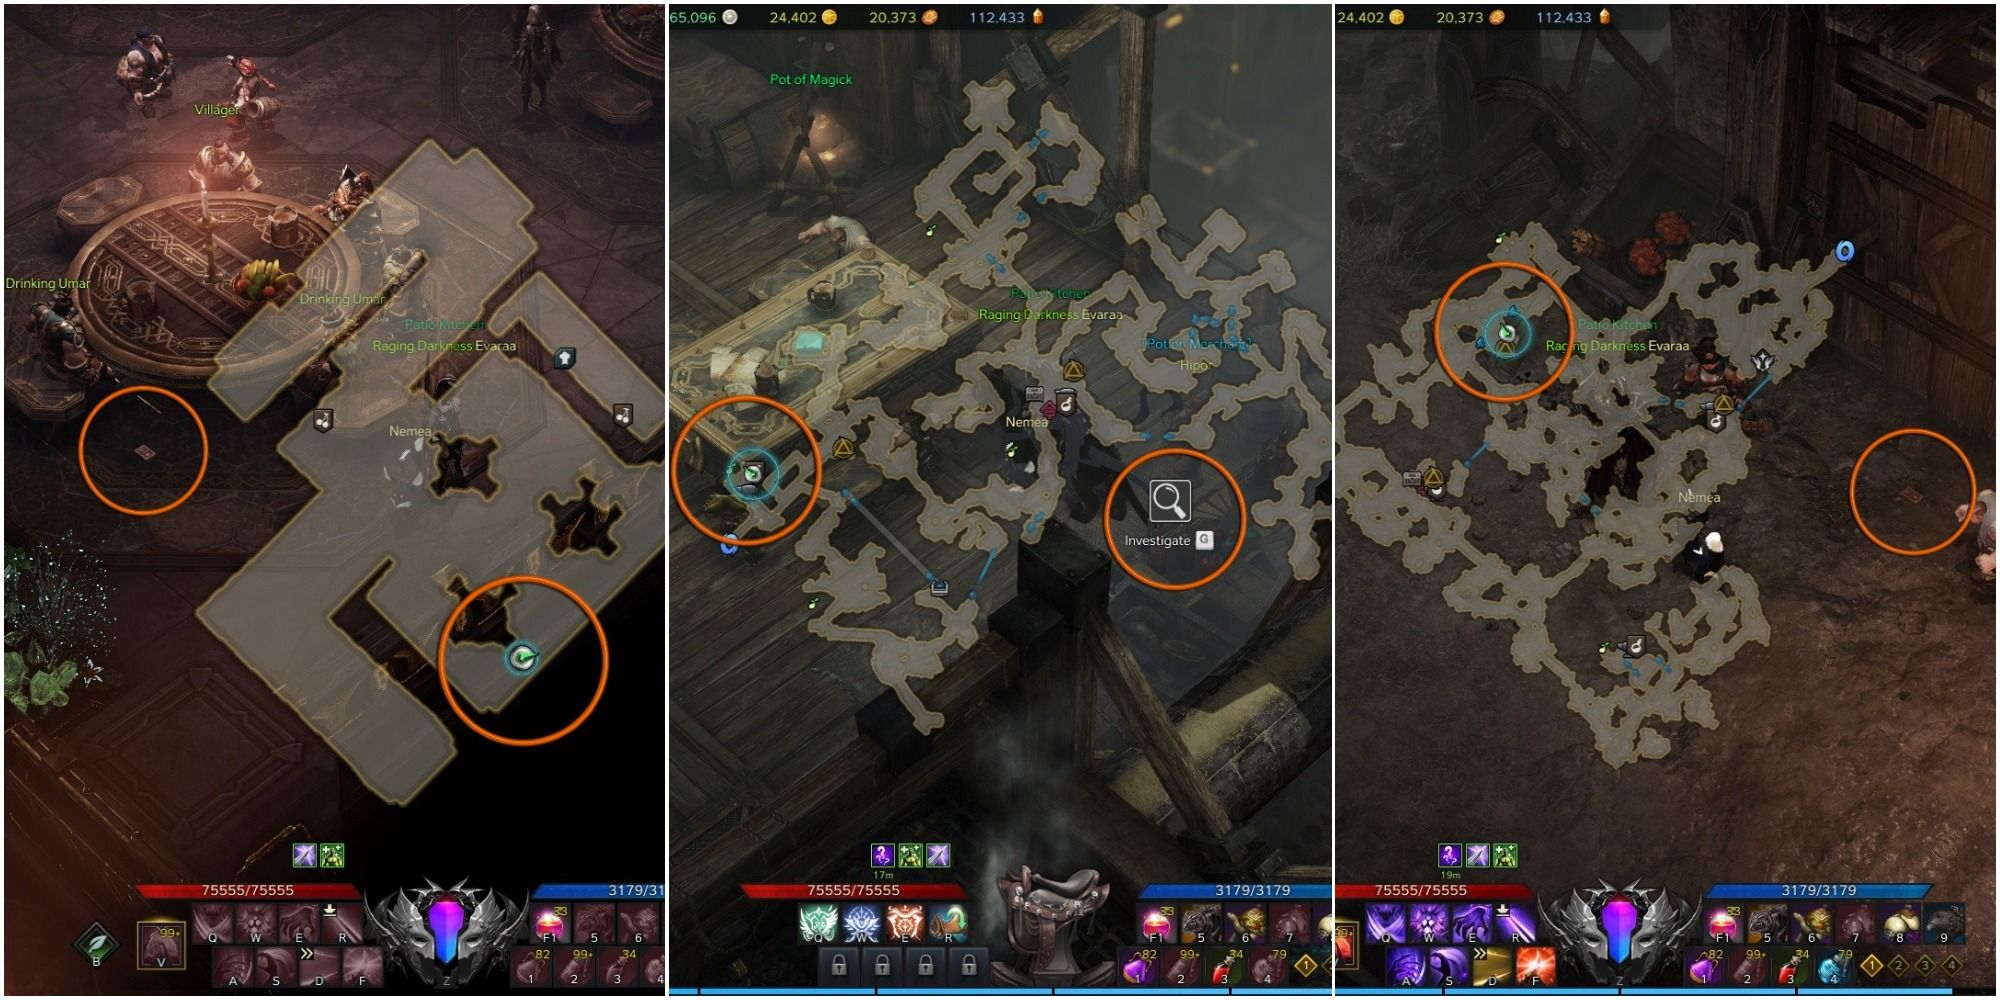 Lost Ark split image of Yorn's Hidden Story 1 locations with mini-maps open, orange circle around objects and player icons